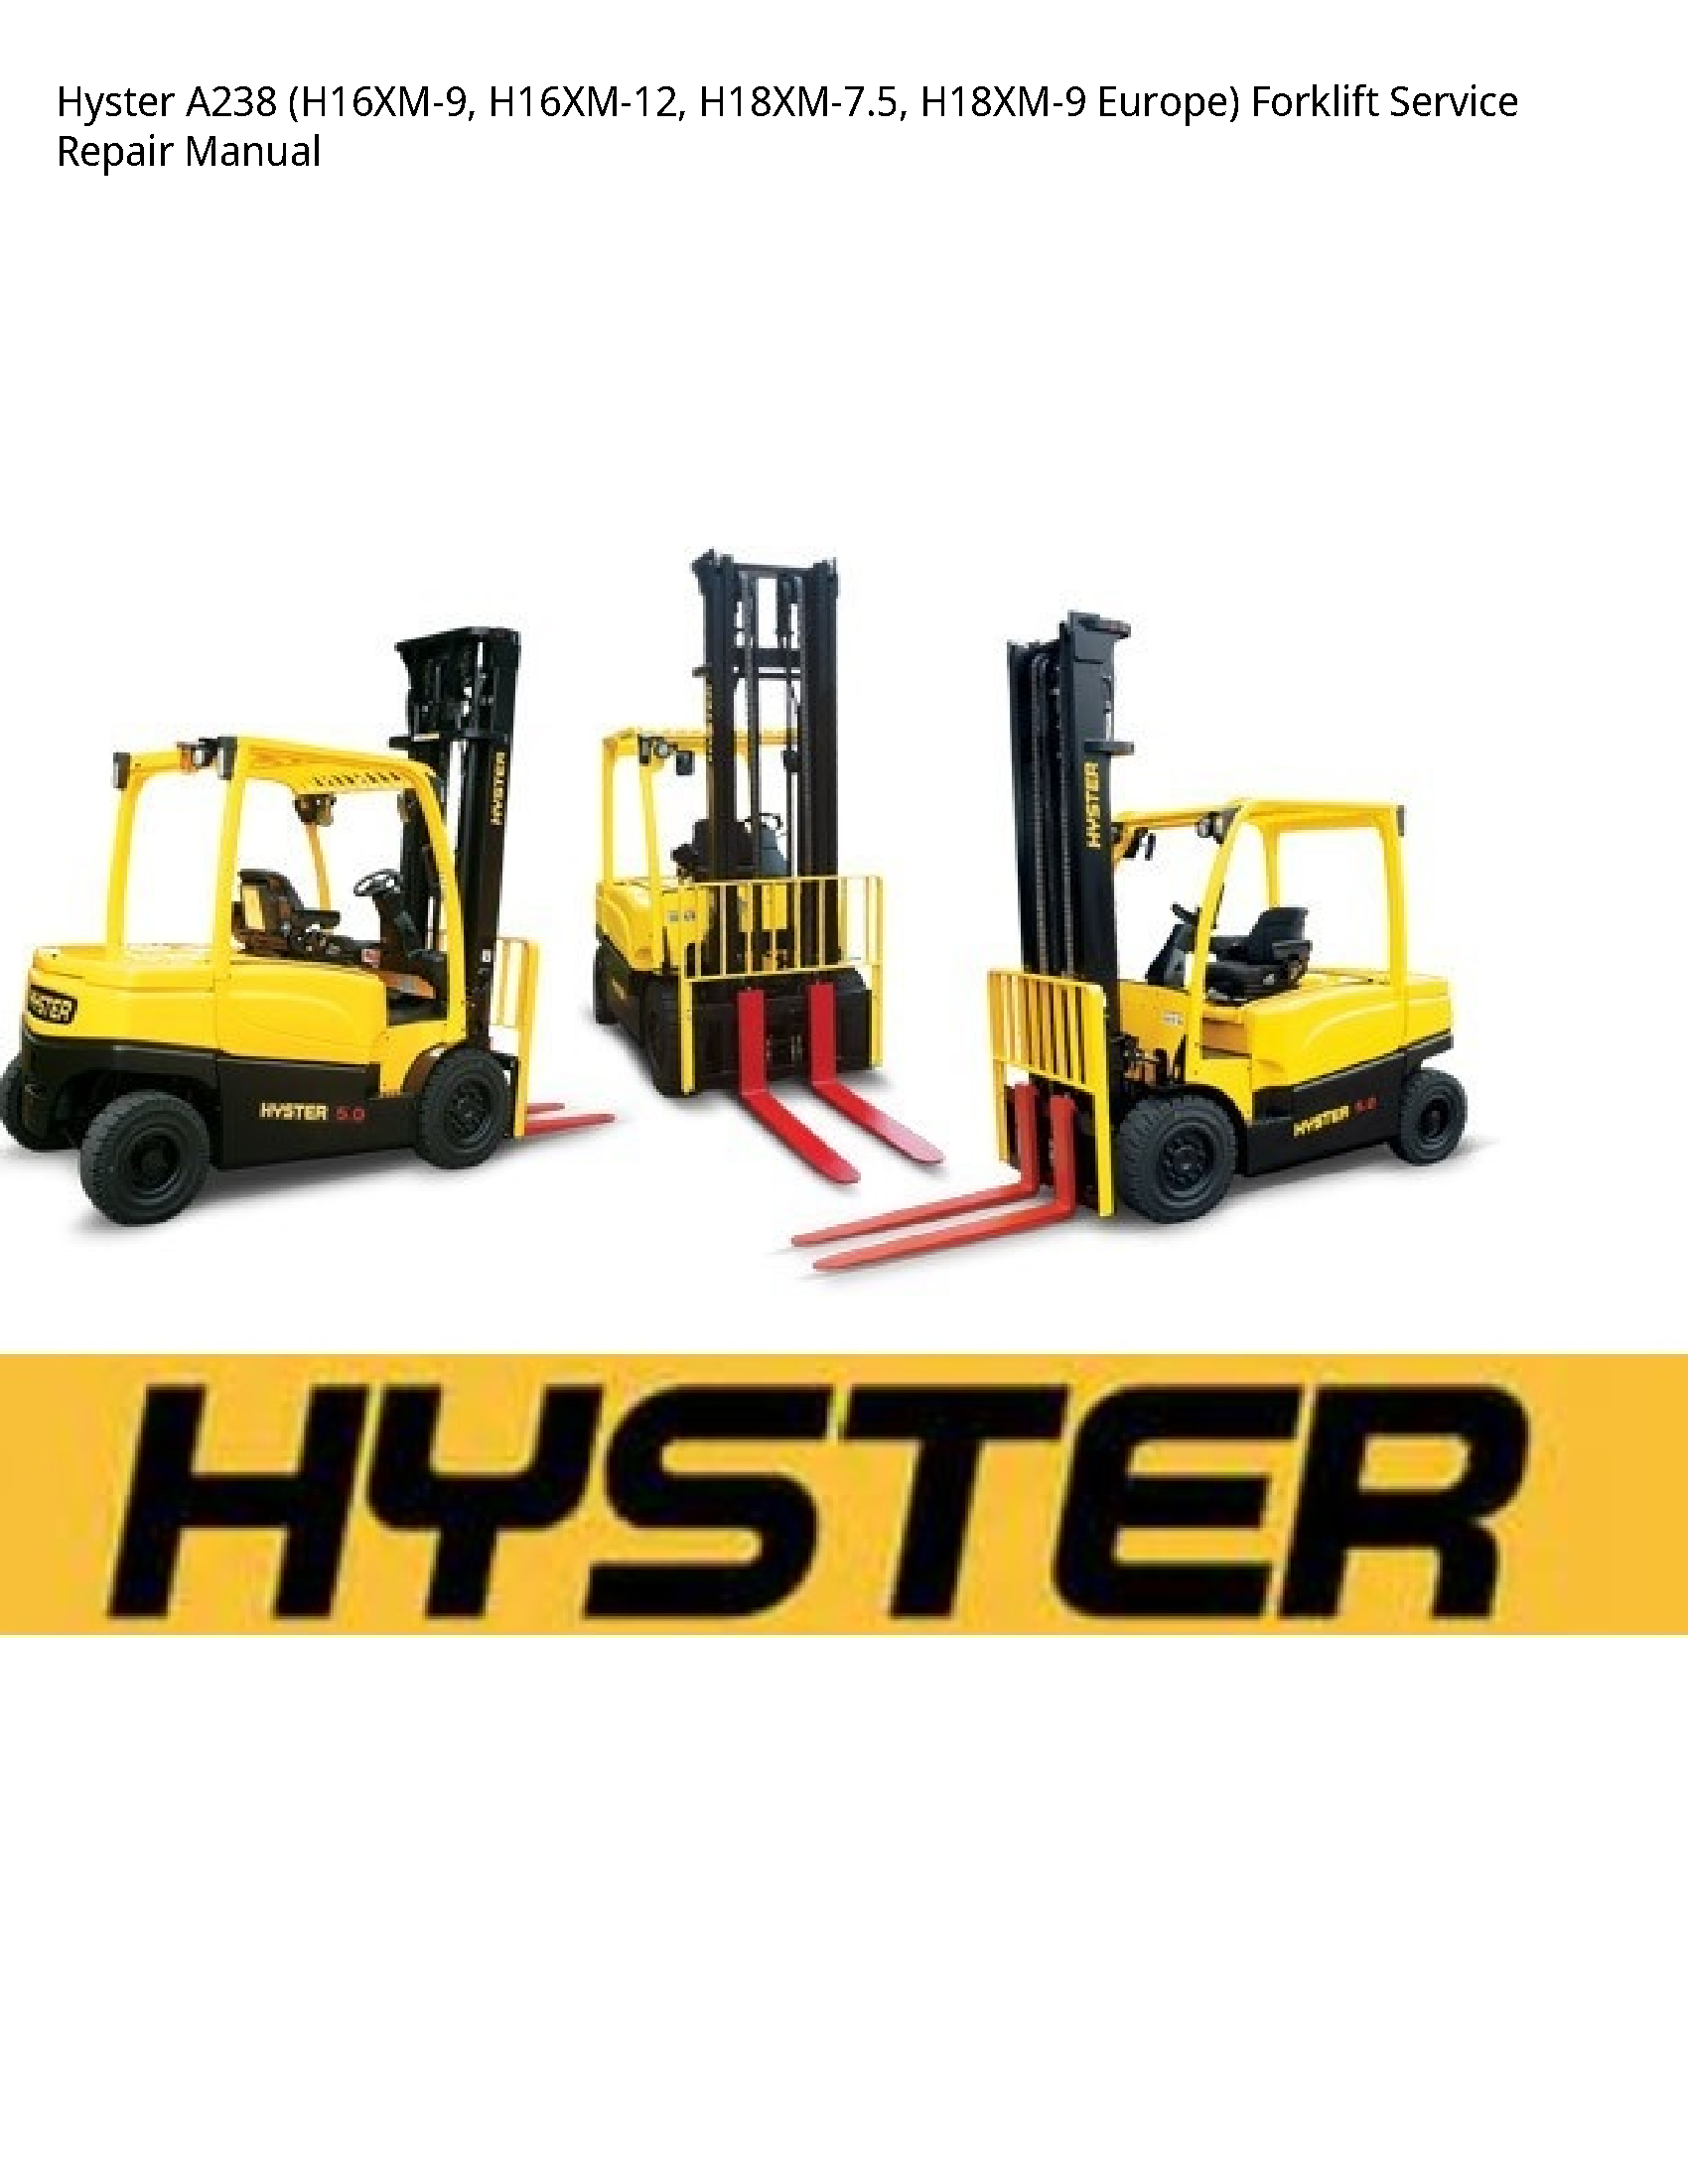 Hyster A238 Europe) Forklift manual